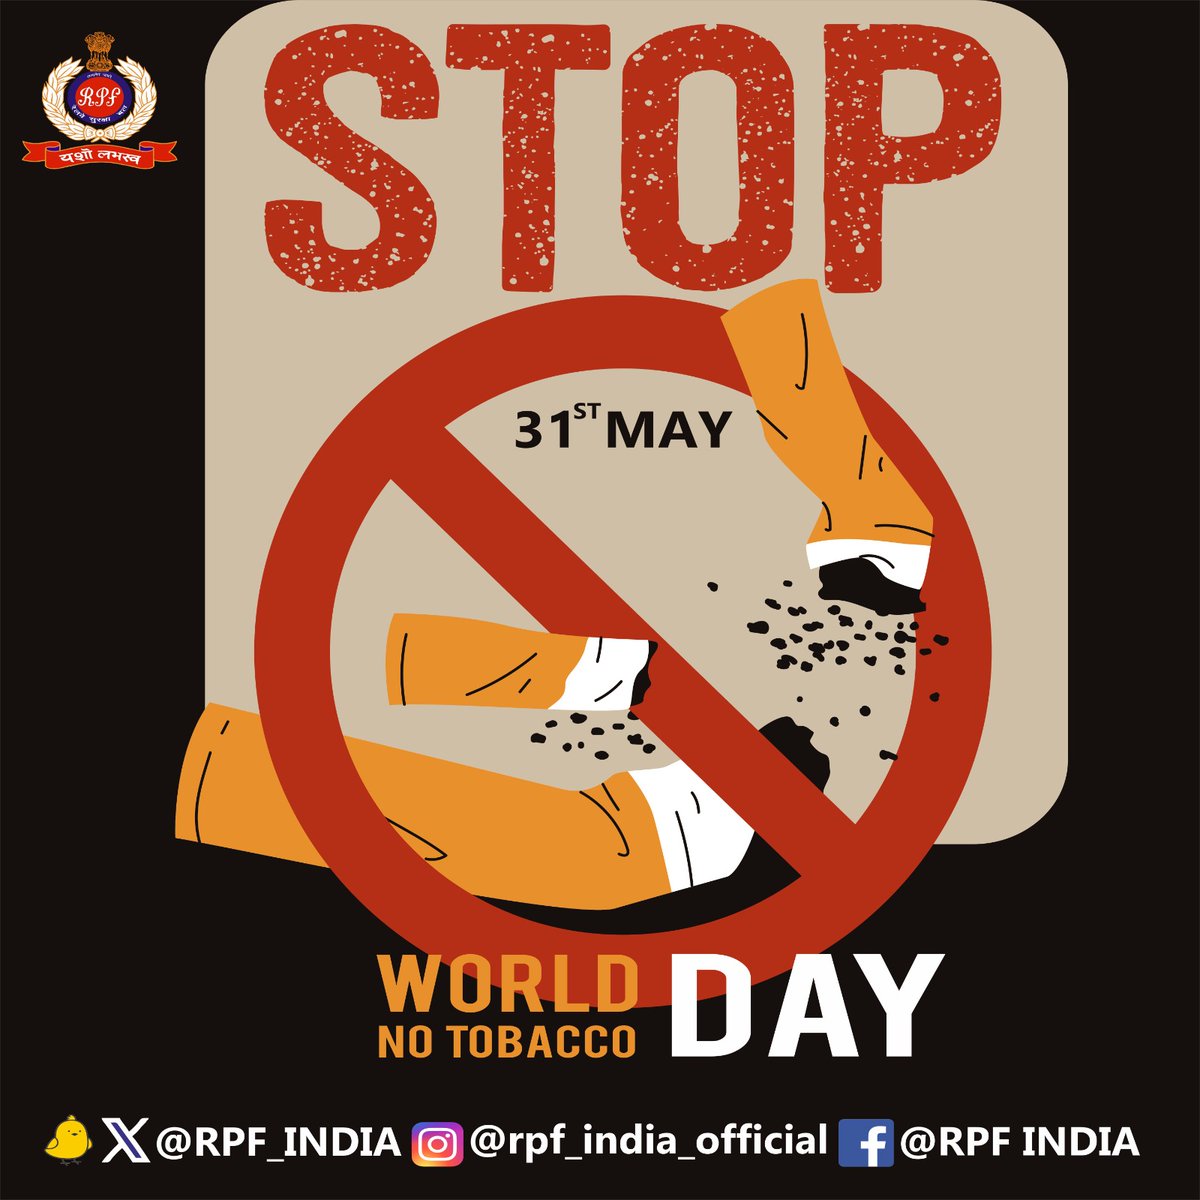 Choose to be smoke-free, and you'll add years to your life and life to your years. Say no to tobacco. Your life is in your hands. #WorldNoTobaccoDay